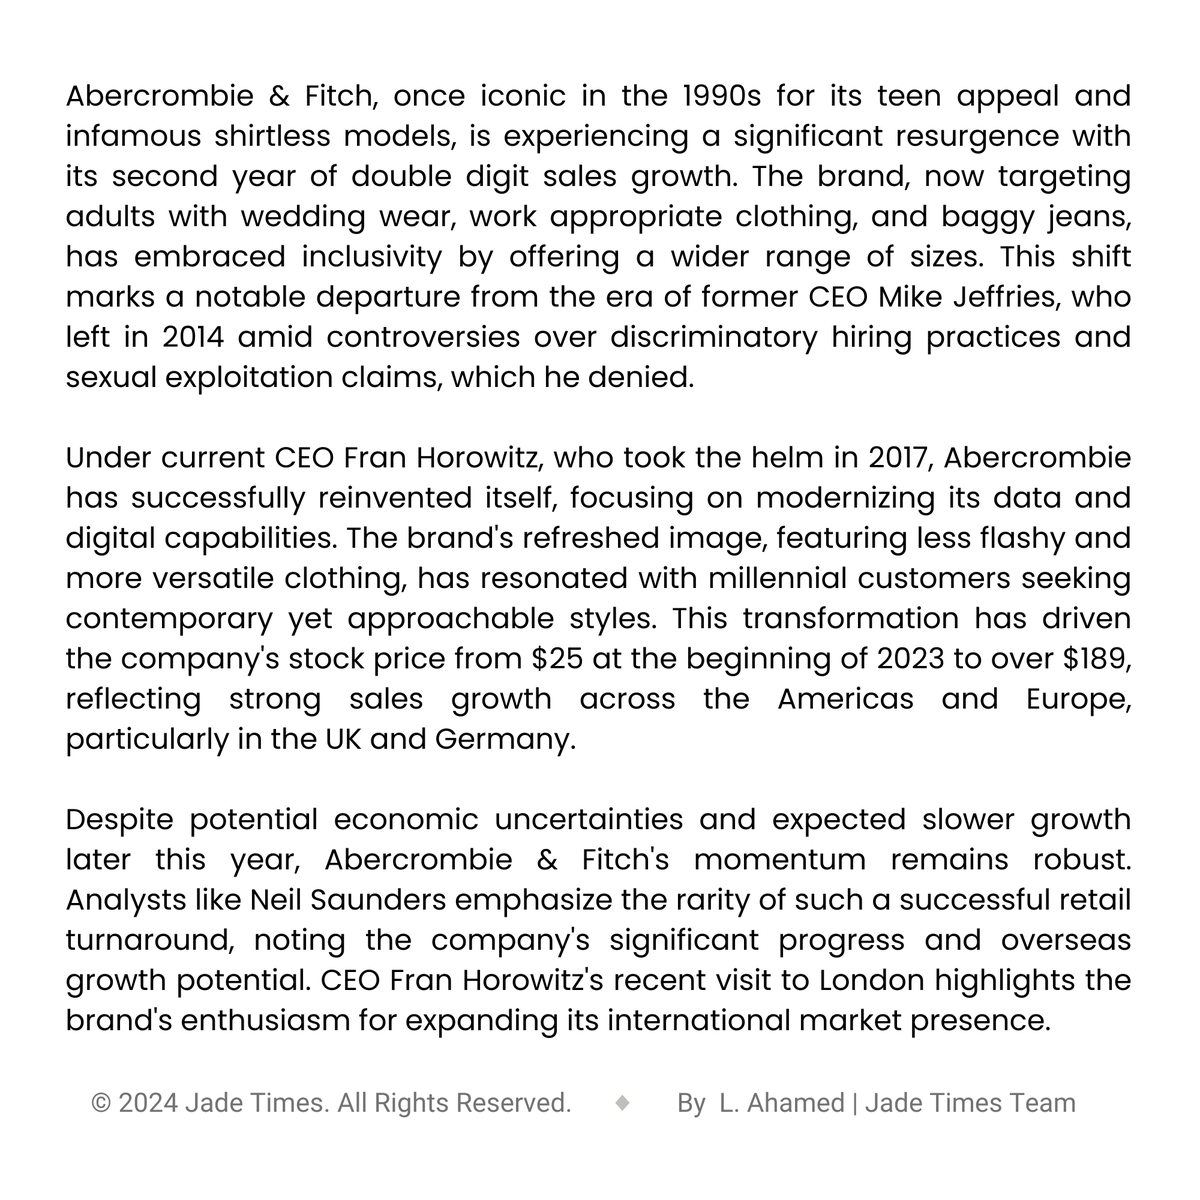 Abercrombie Experiences Significant Surge Amid Widespread 1990s Fashion Revival
——
Abercrombie & Fitch is experiencing a remarkable revival with double digit sales growth and a revamped, inclusive brand image. 
——
Visit the link in our bio.
#jadetimes #AbercrombieRevival